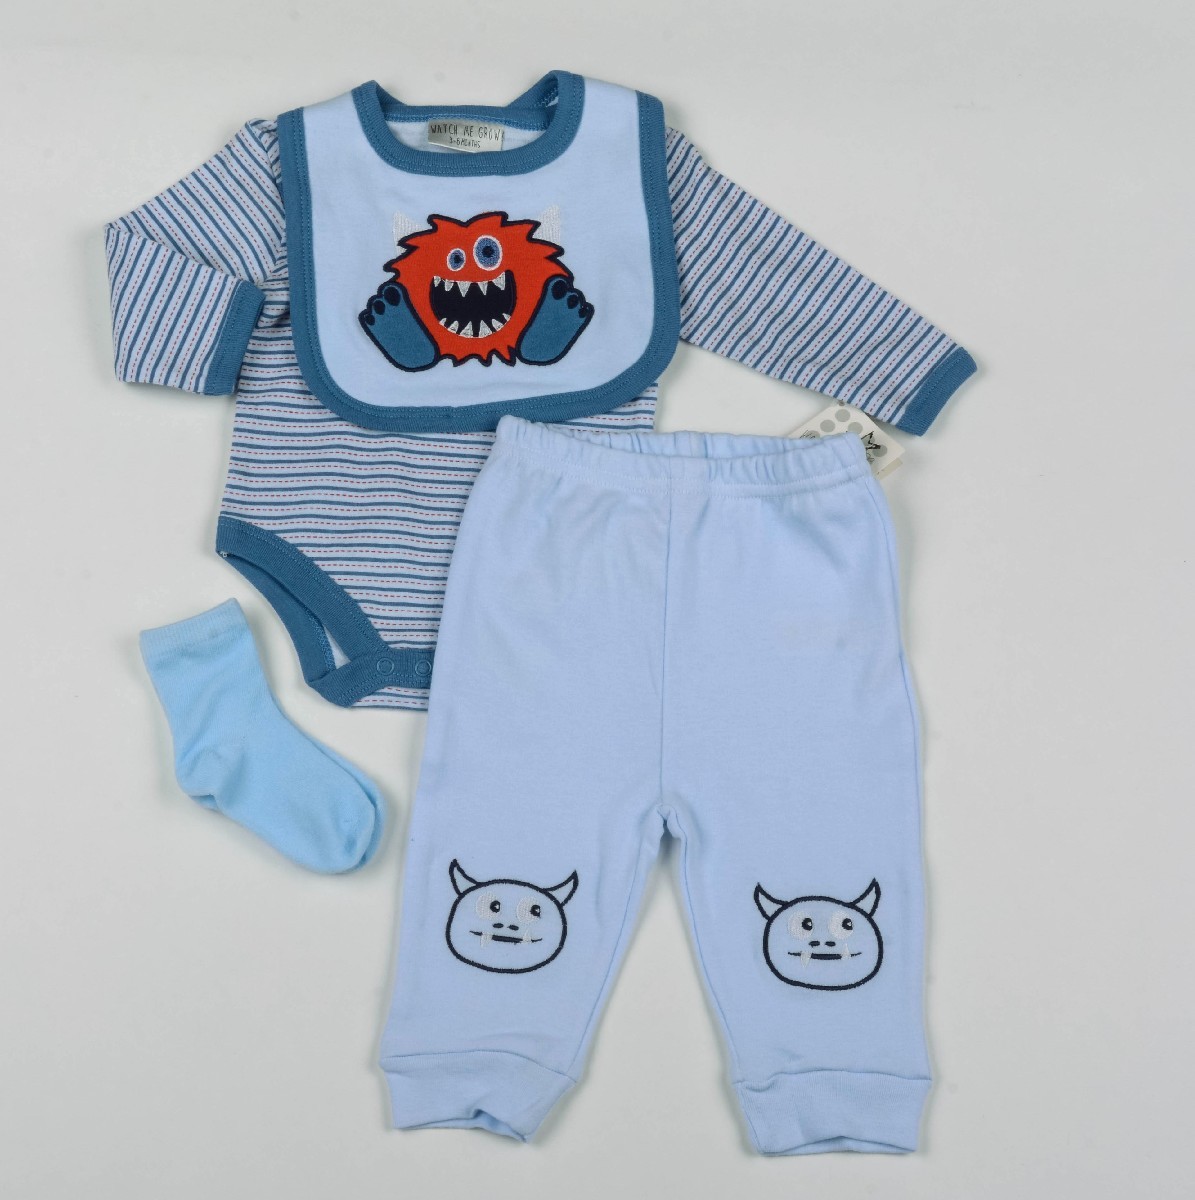 Baby 4pc Layette Gift Set - Bodysuit, Bib, Trouser And Mitts